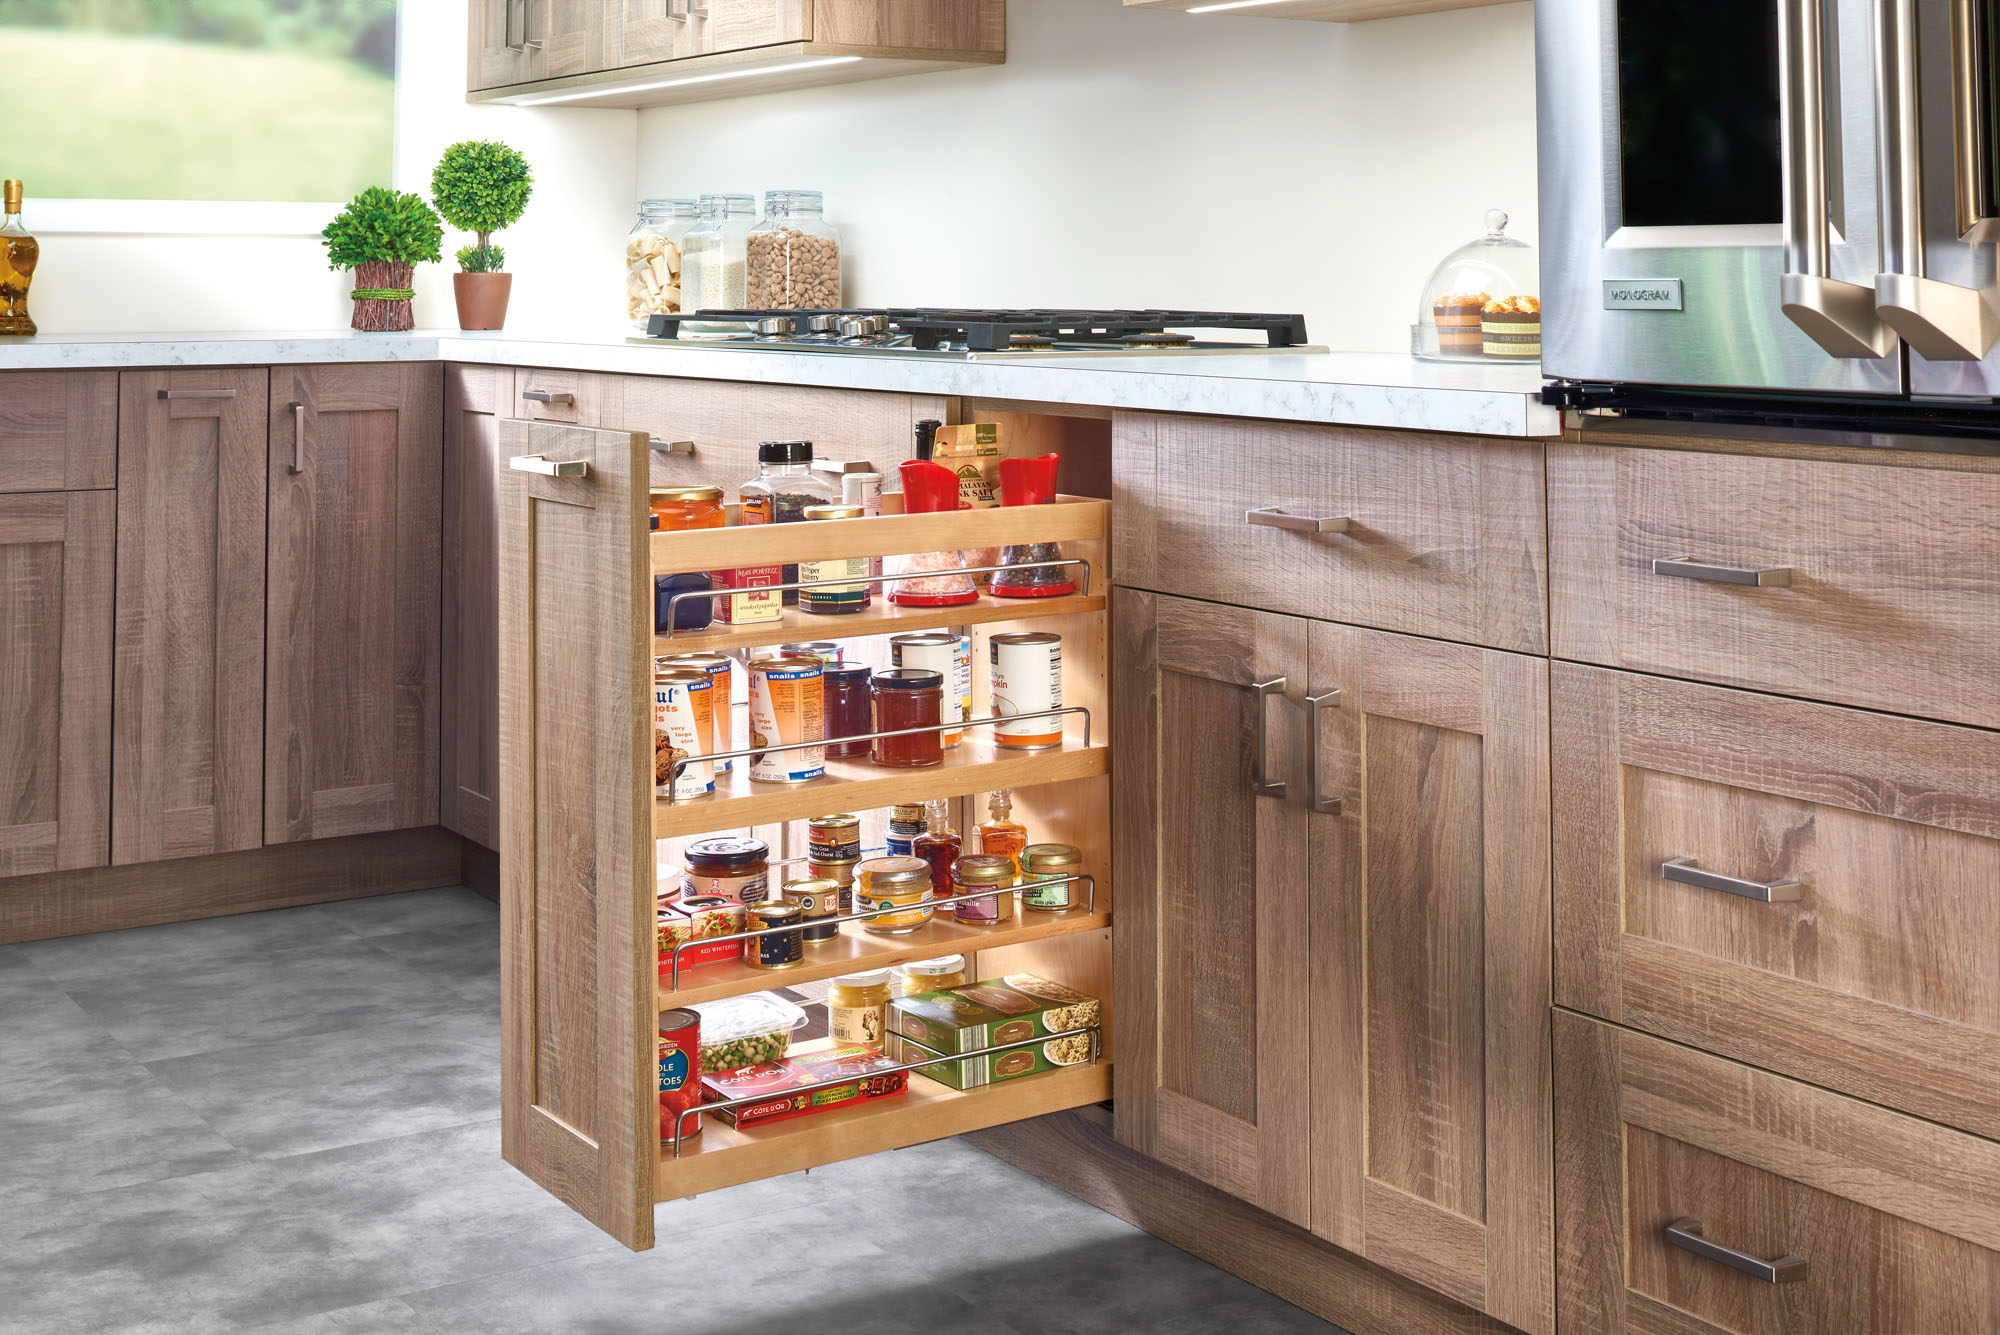 The 449 Series from Rev-A-Shelf includes the Bottom and Side Mount Soft-Close Base Organizer (shown), and the Bottom and Side Mount Soft-Close Utensil Bin Base Organizer. Featuring natural maple construction and Blum Tandem Soft-Close slides, the system is designed for 9-inch or 12-inch wide, full-height base cabinets, offers three shelf units, and is TSCA Title VI compliant.